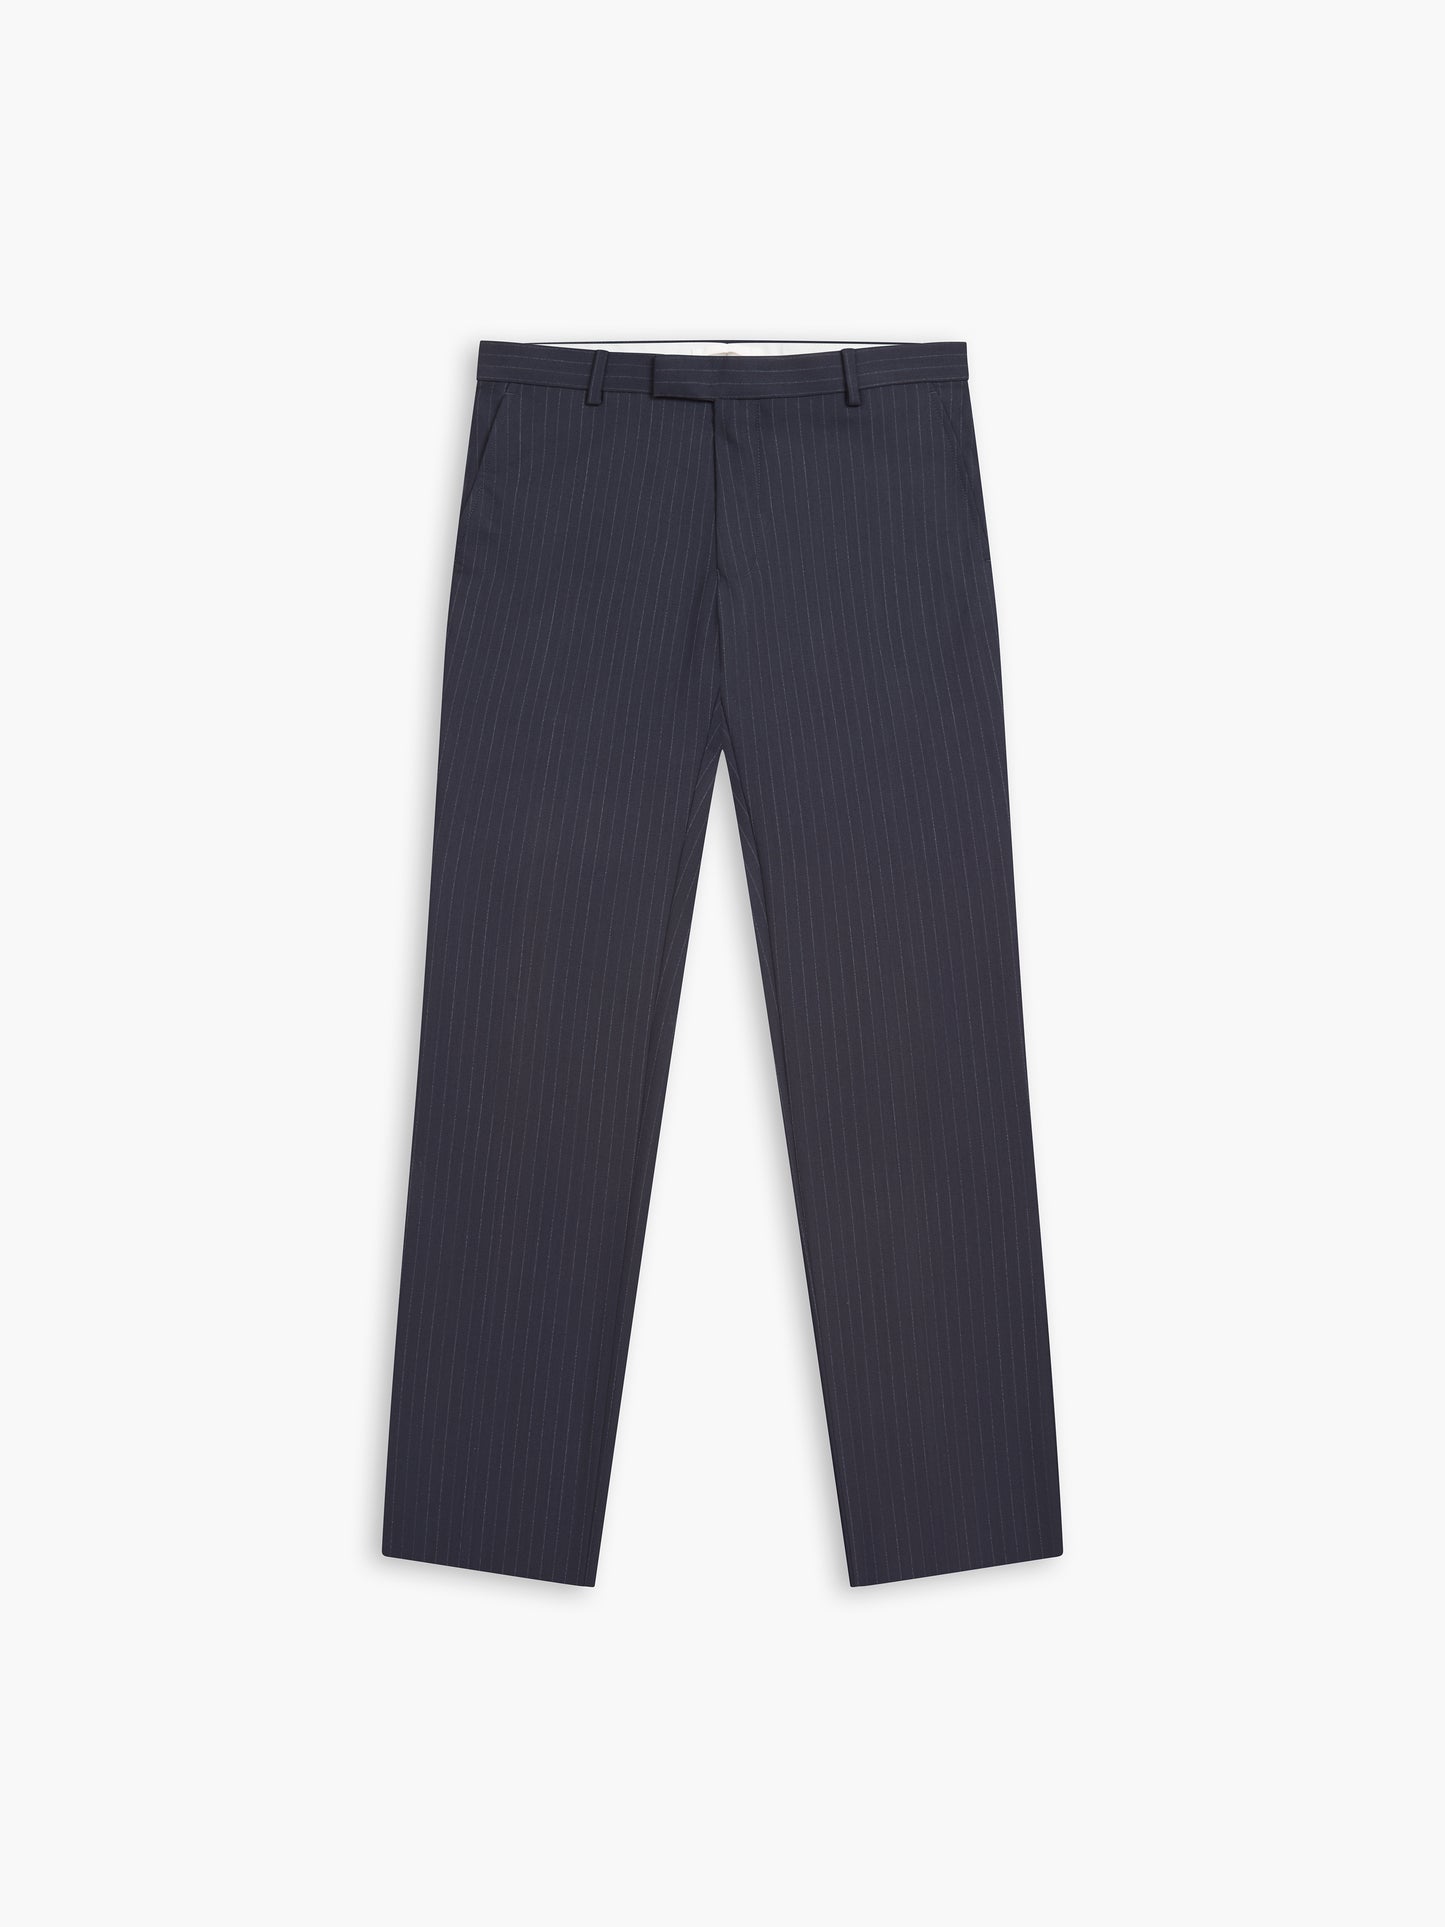 Lomu Infinity Active Slim Fit Navy Stripe Trousers